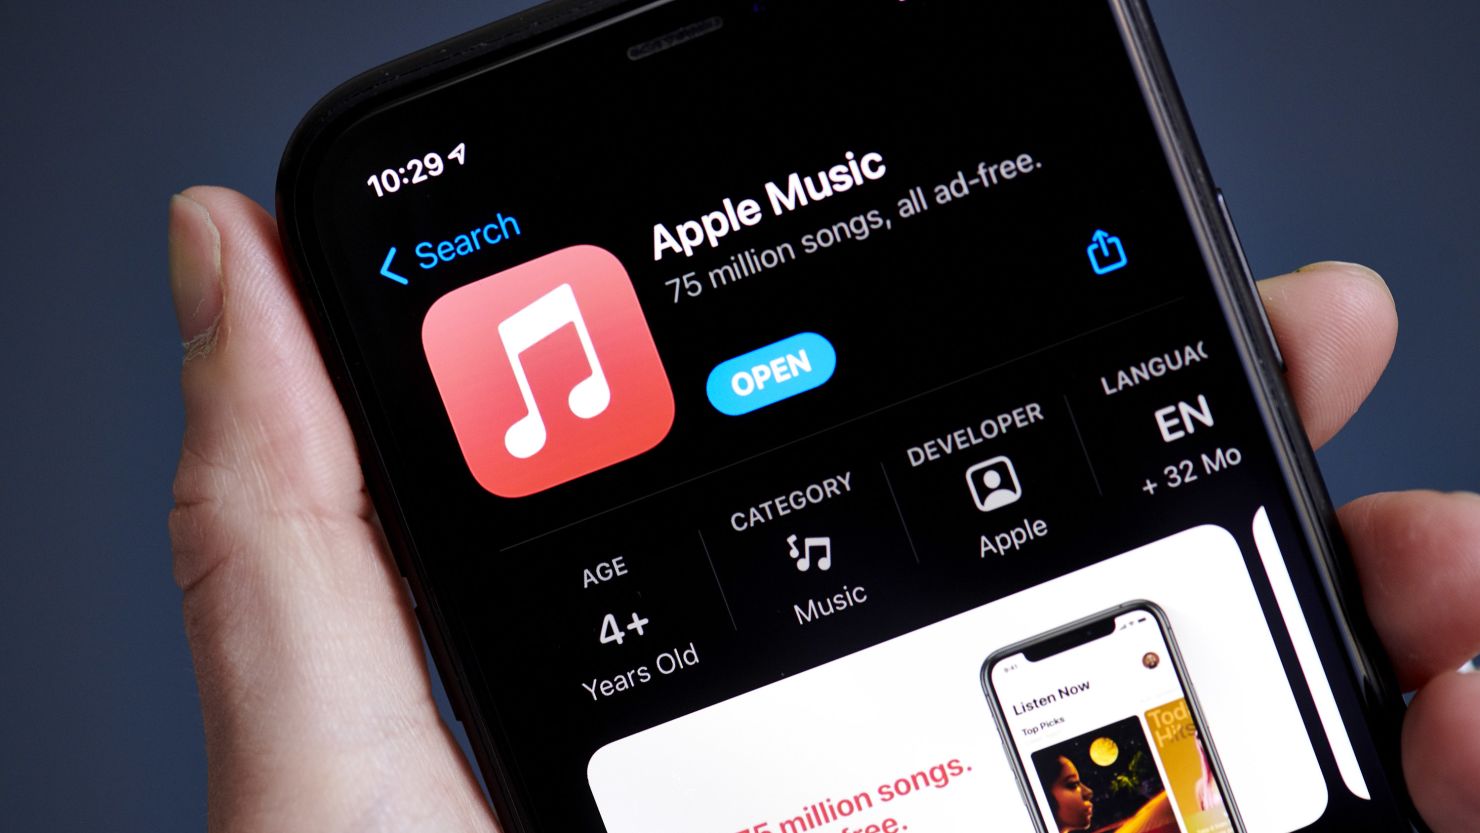 The EU is imposing its first-ever antitrust penalty on Apple for “abusing its dominant position” as a distributor of music streaming apps.